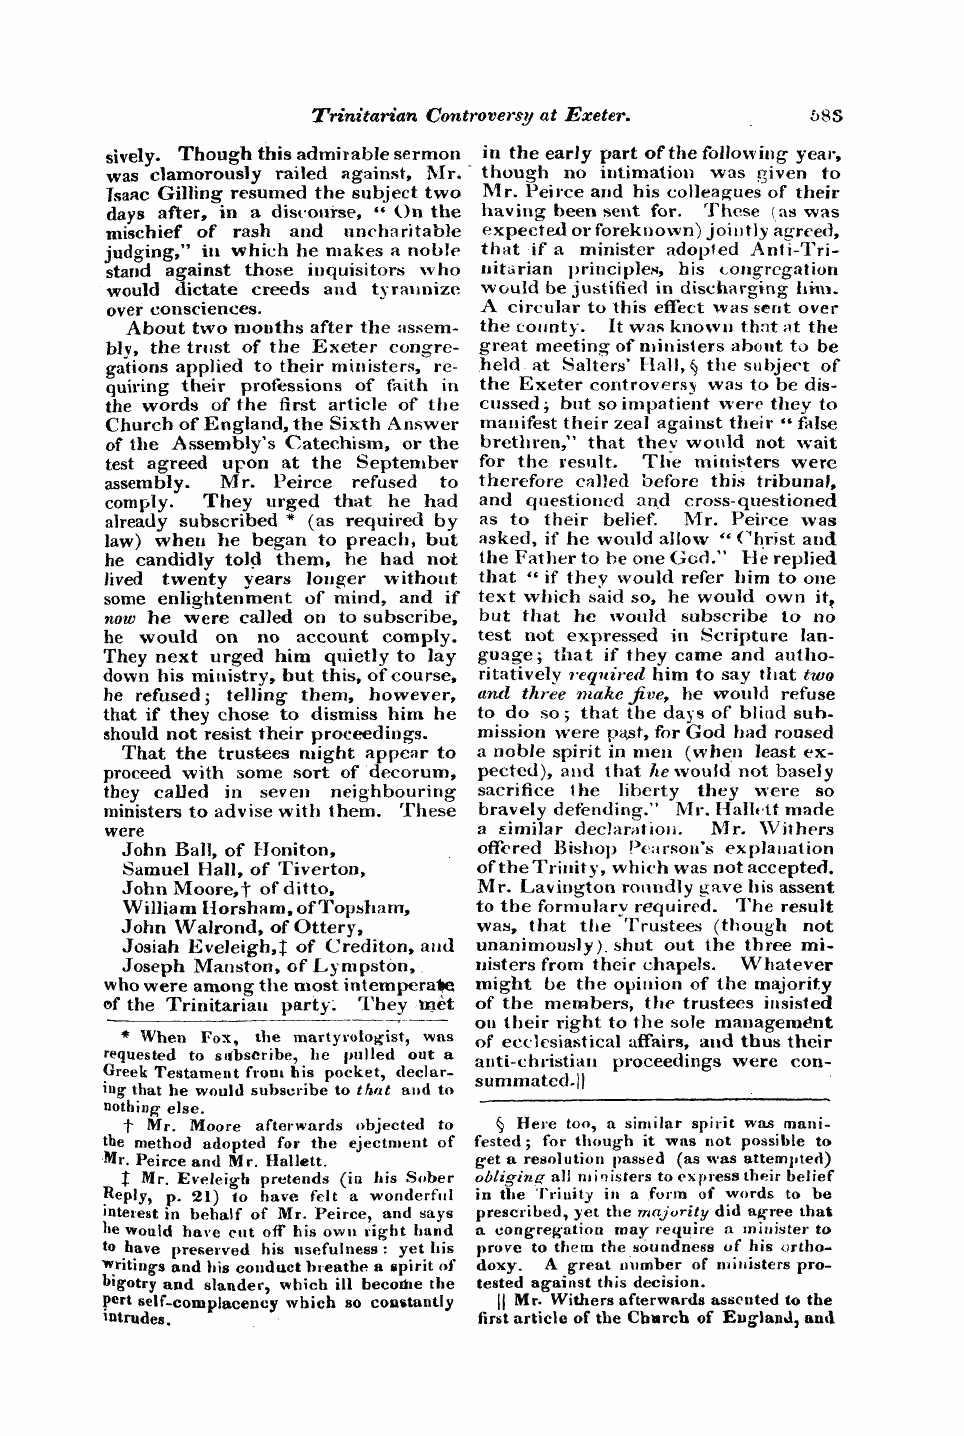 Monthly Repository (1806-1838) and Unitarian Chronicle (1832-1833): F Y, 1st edition: 11